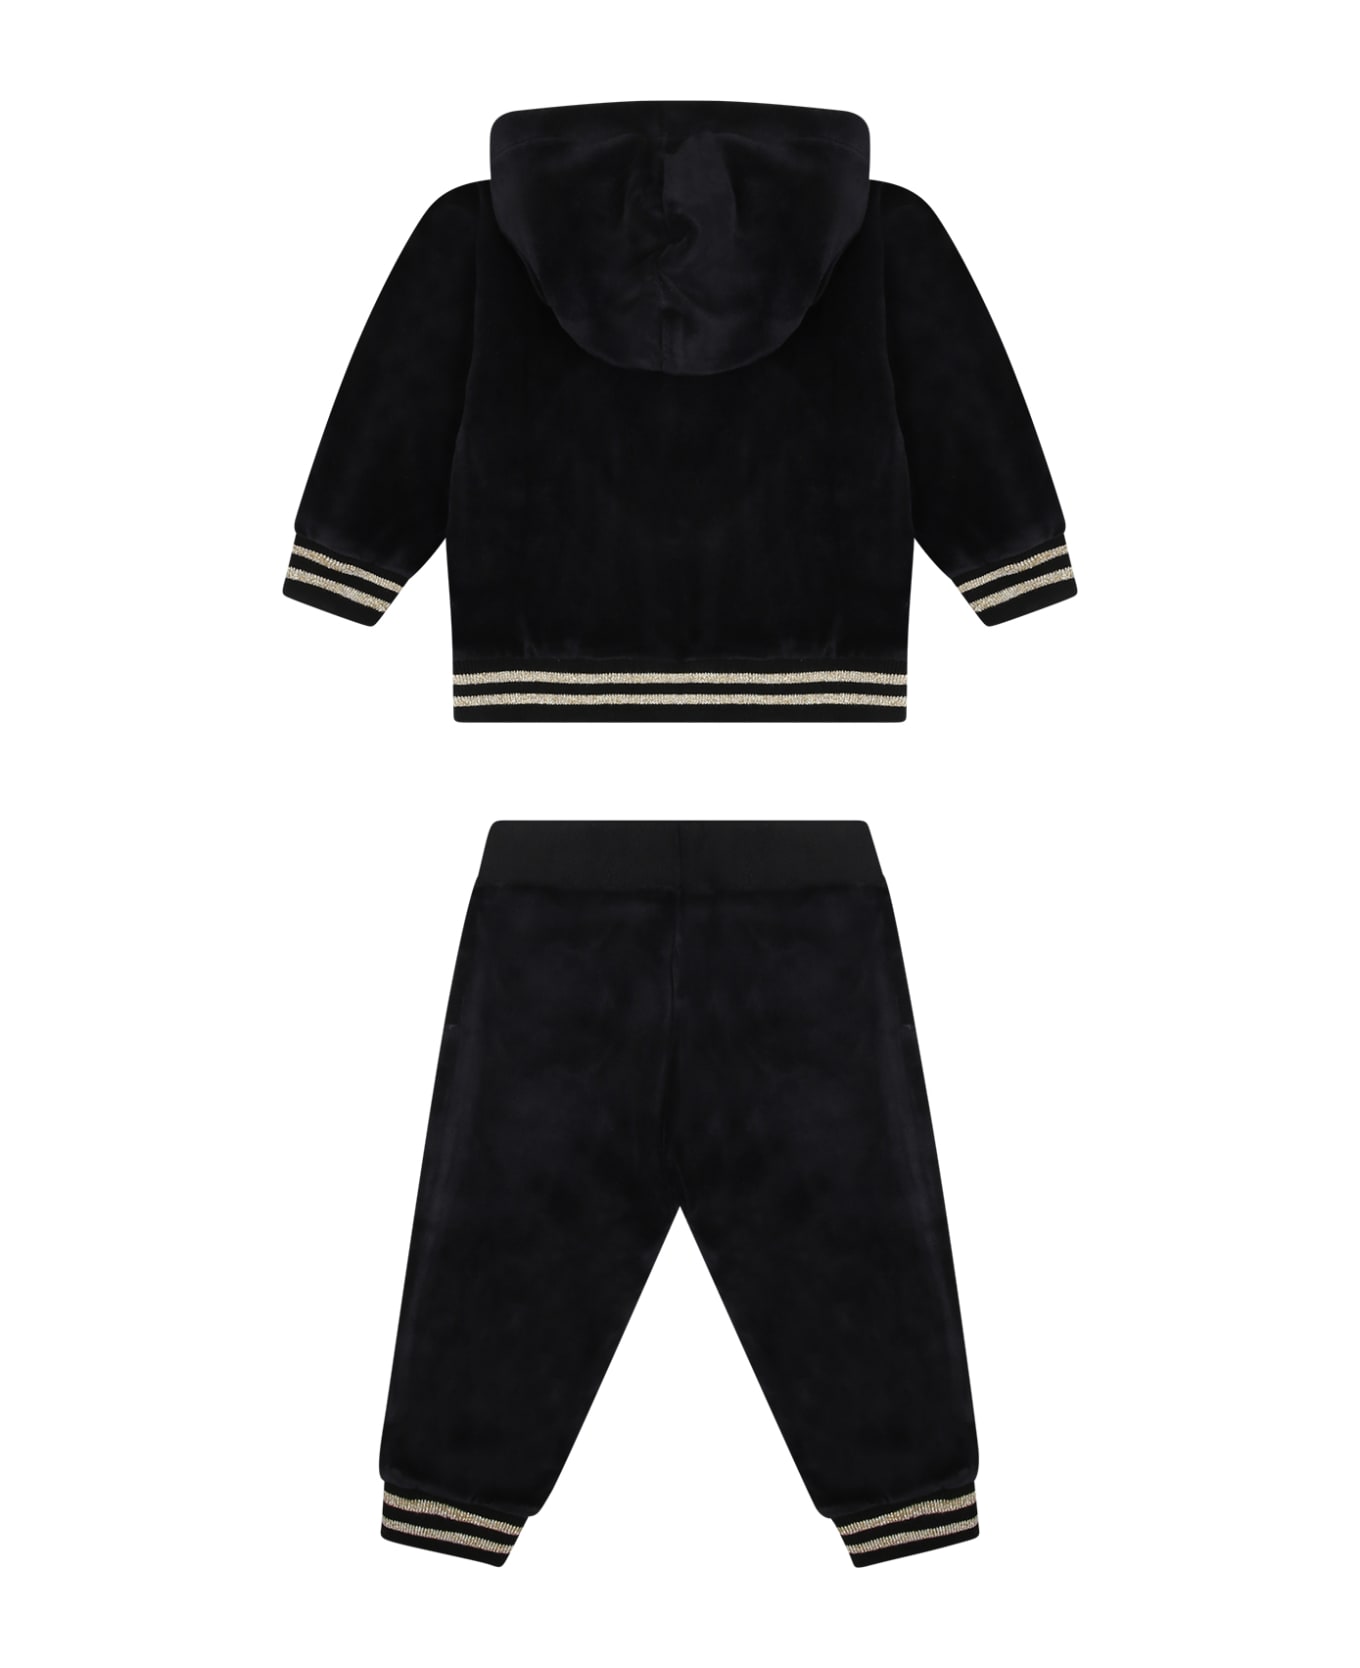 Moschino Black Brushed Cotton Set For Baby Girl - Black